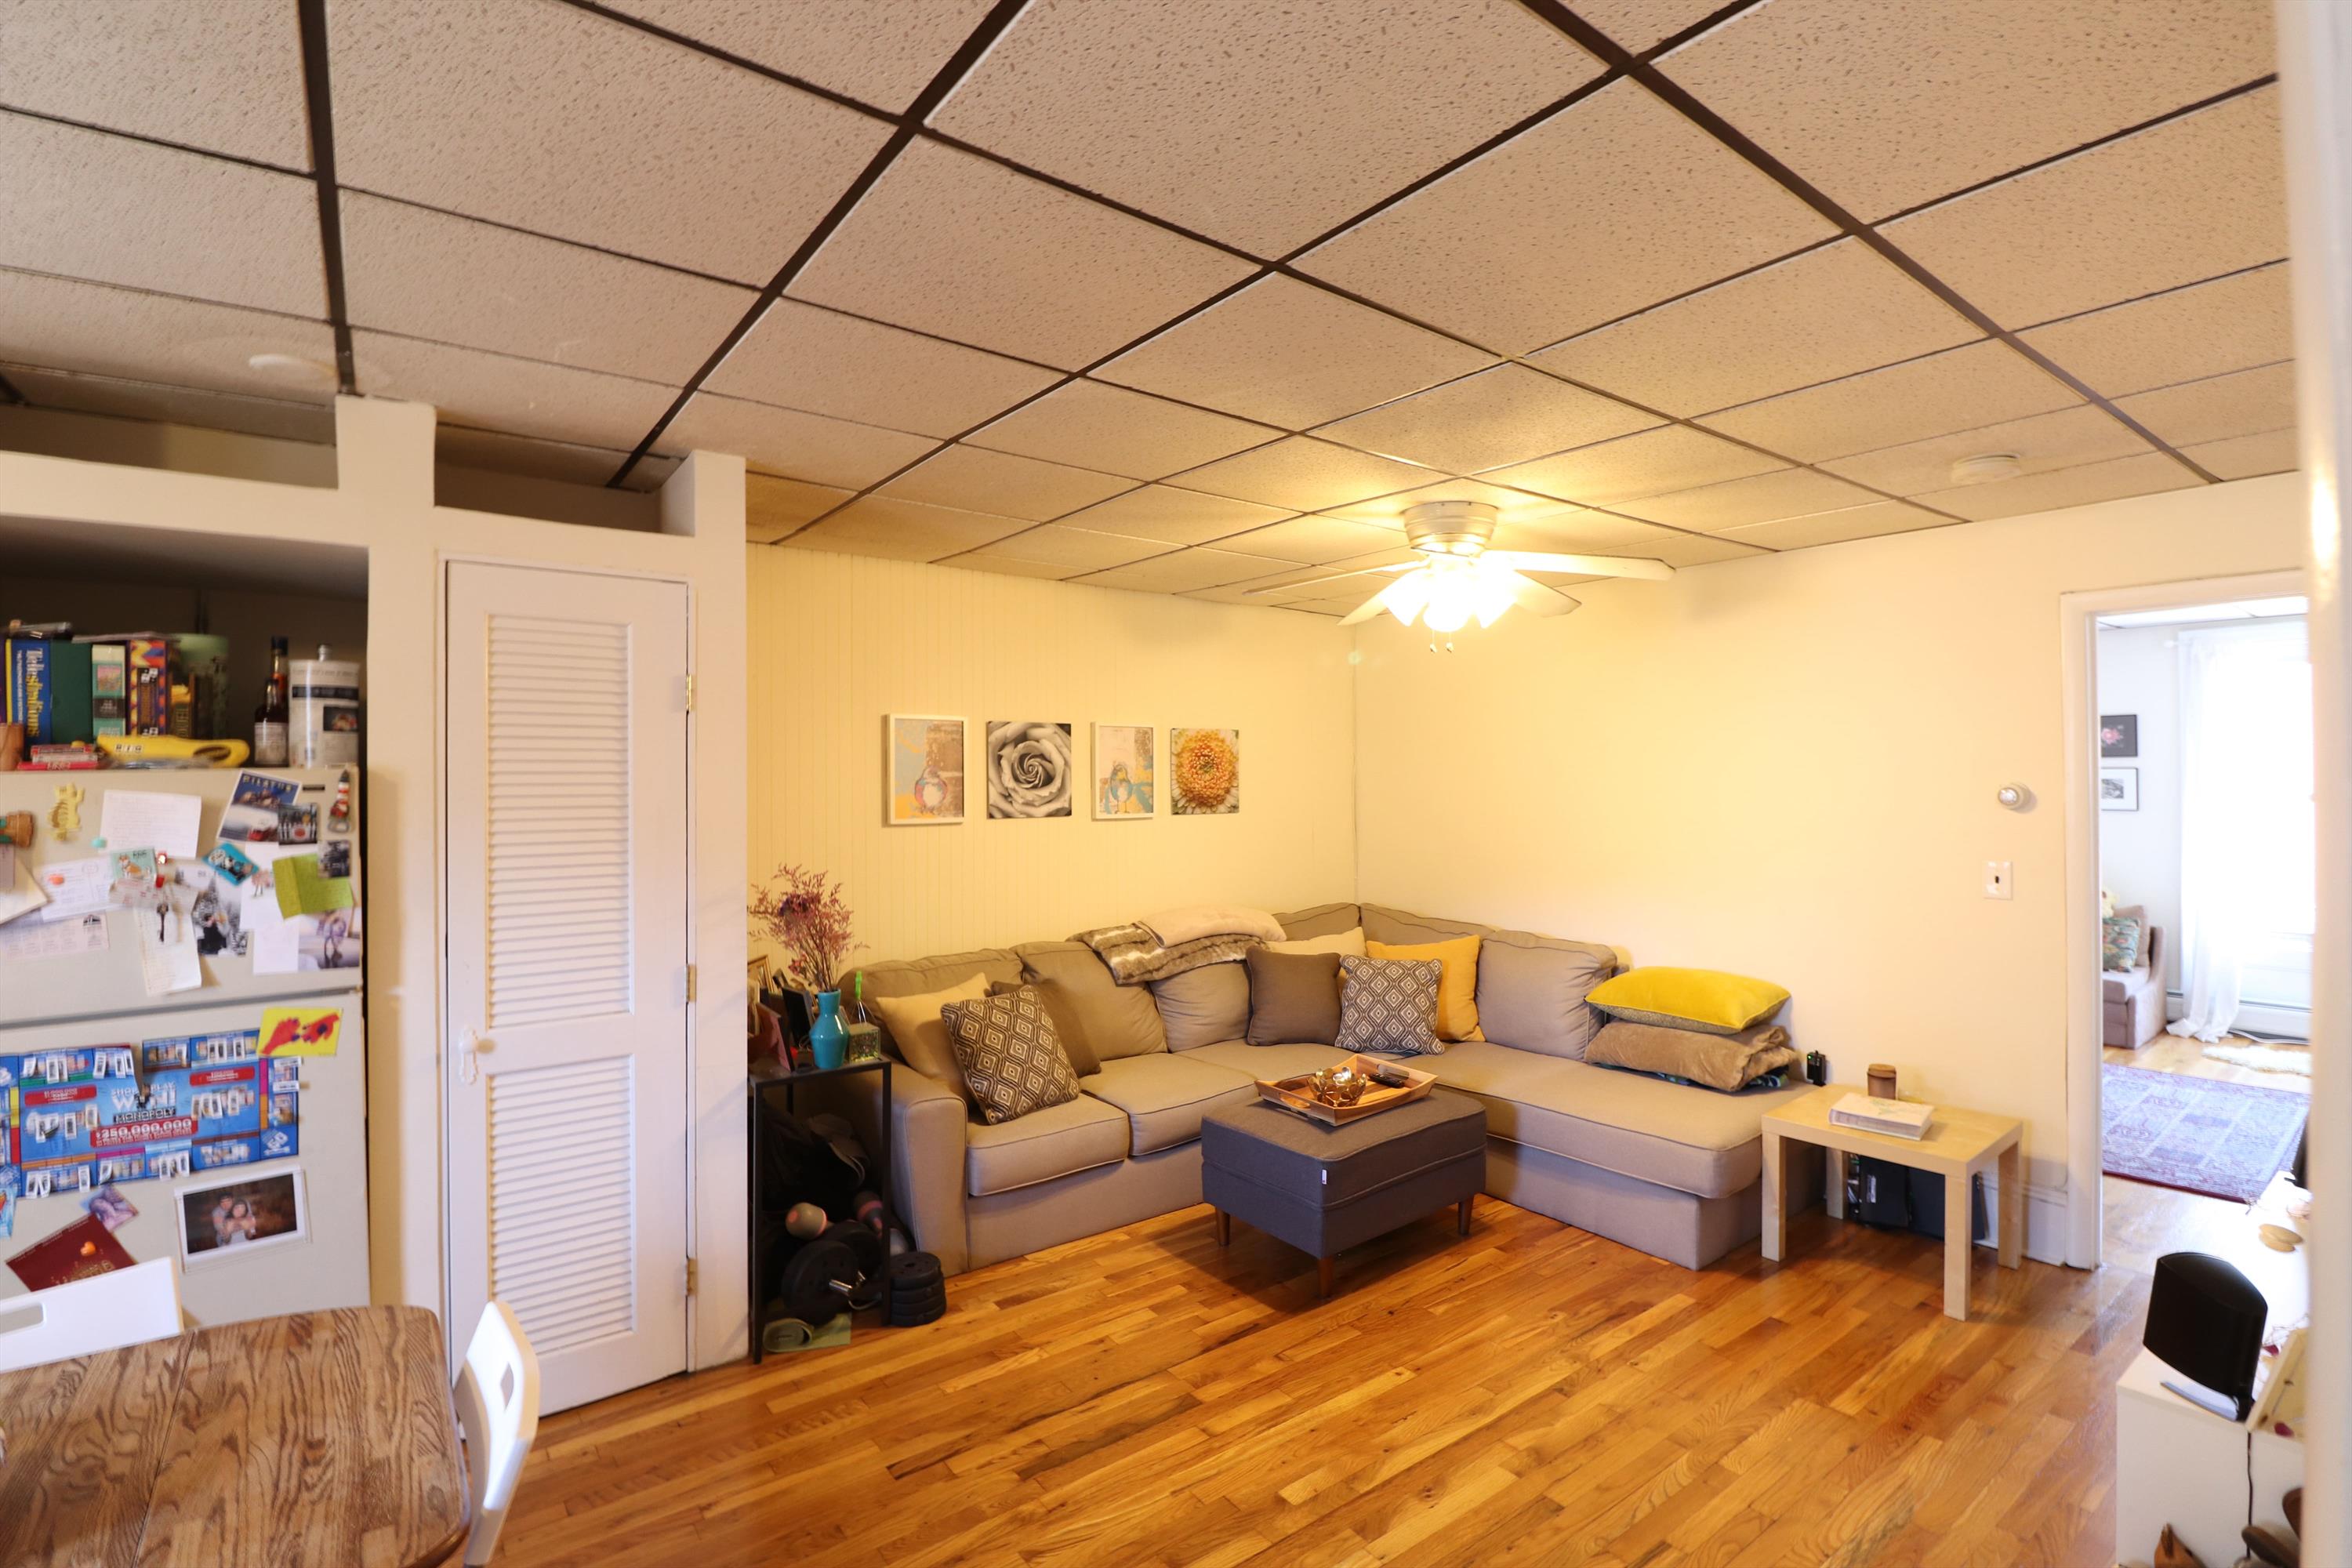 No Broker Fee
Amazing location for this one bed one bath w/ office den. Home features a huge open layout, generous size bedroom, extra den (perfect for office), hardwood floors, TONS of closet space, laundry in the building and nice size shared outdoor space. April 1 move in
